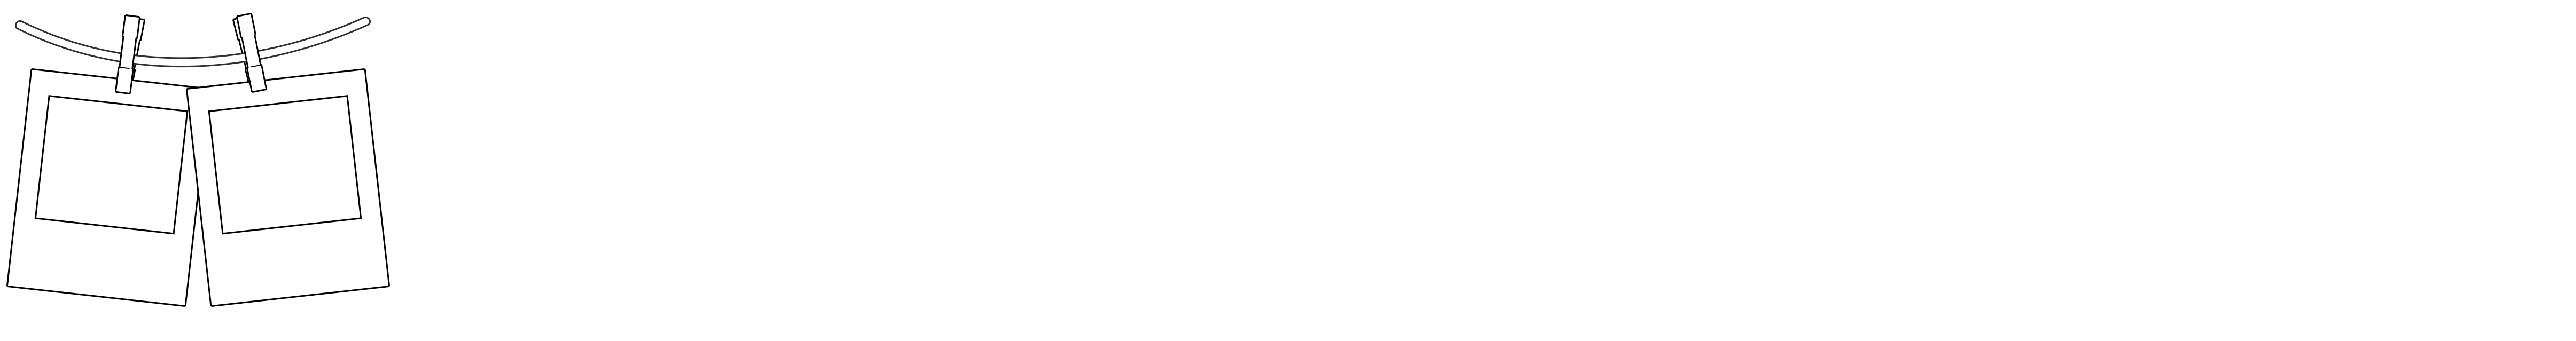 Gaby Laibach Photography logo